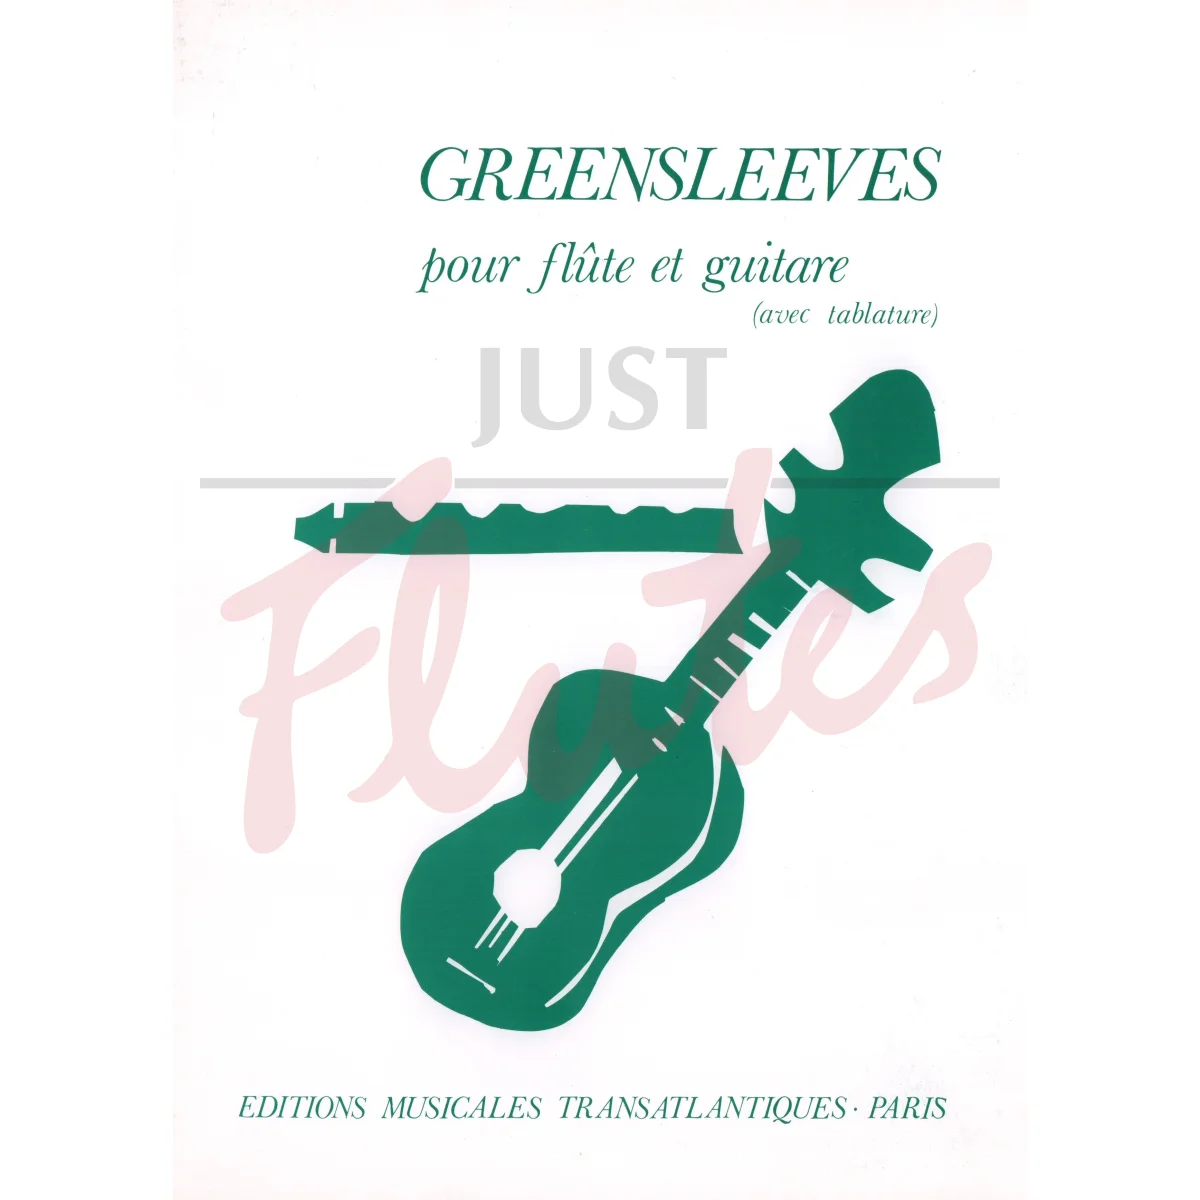 Greensleeves for Flute and Guitar